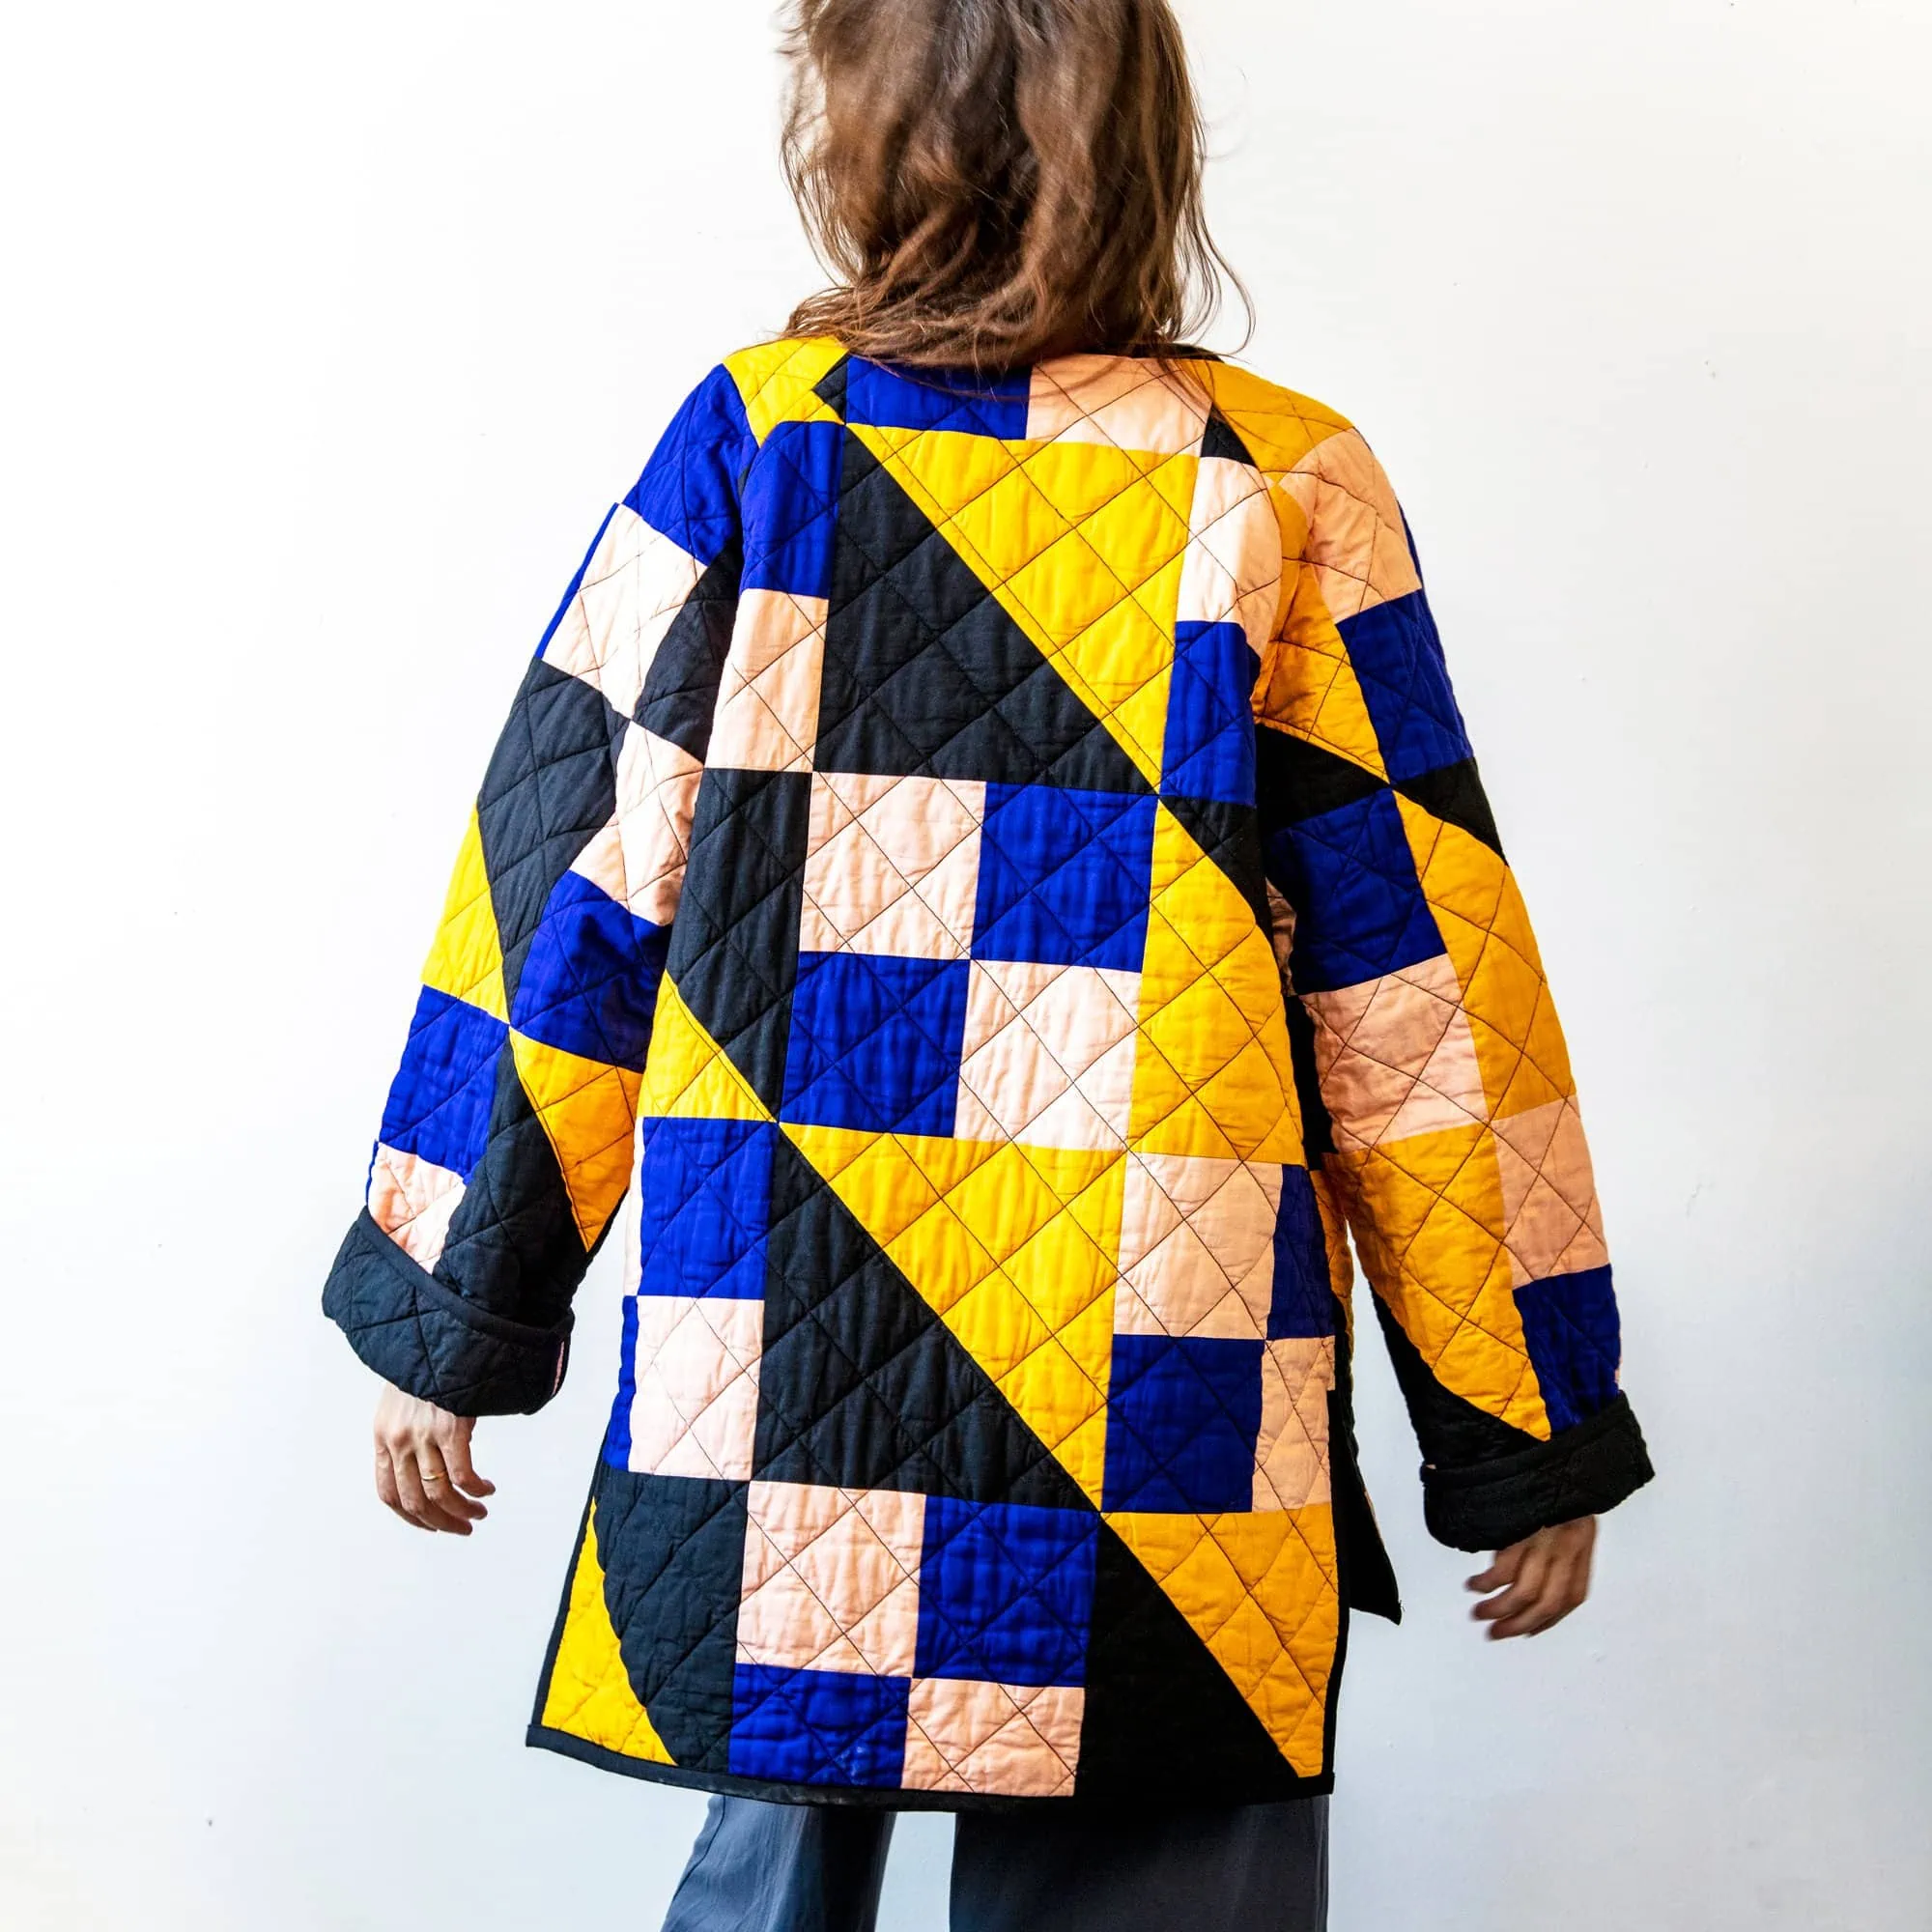 Get a Hippie,  Look This Fall, With Quilt Coats - The New York Times